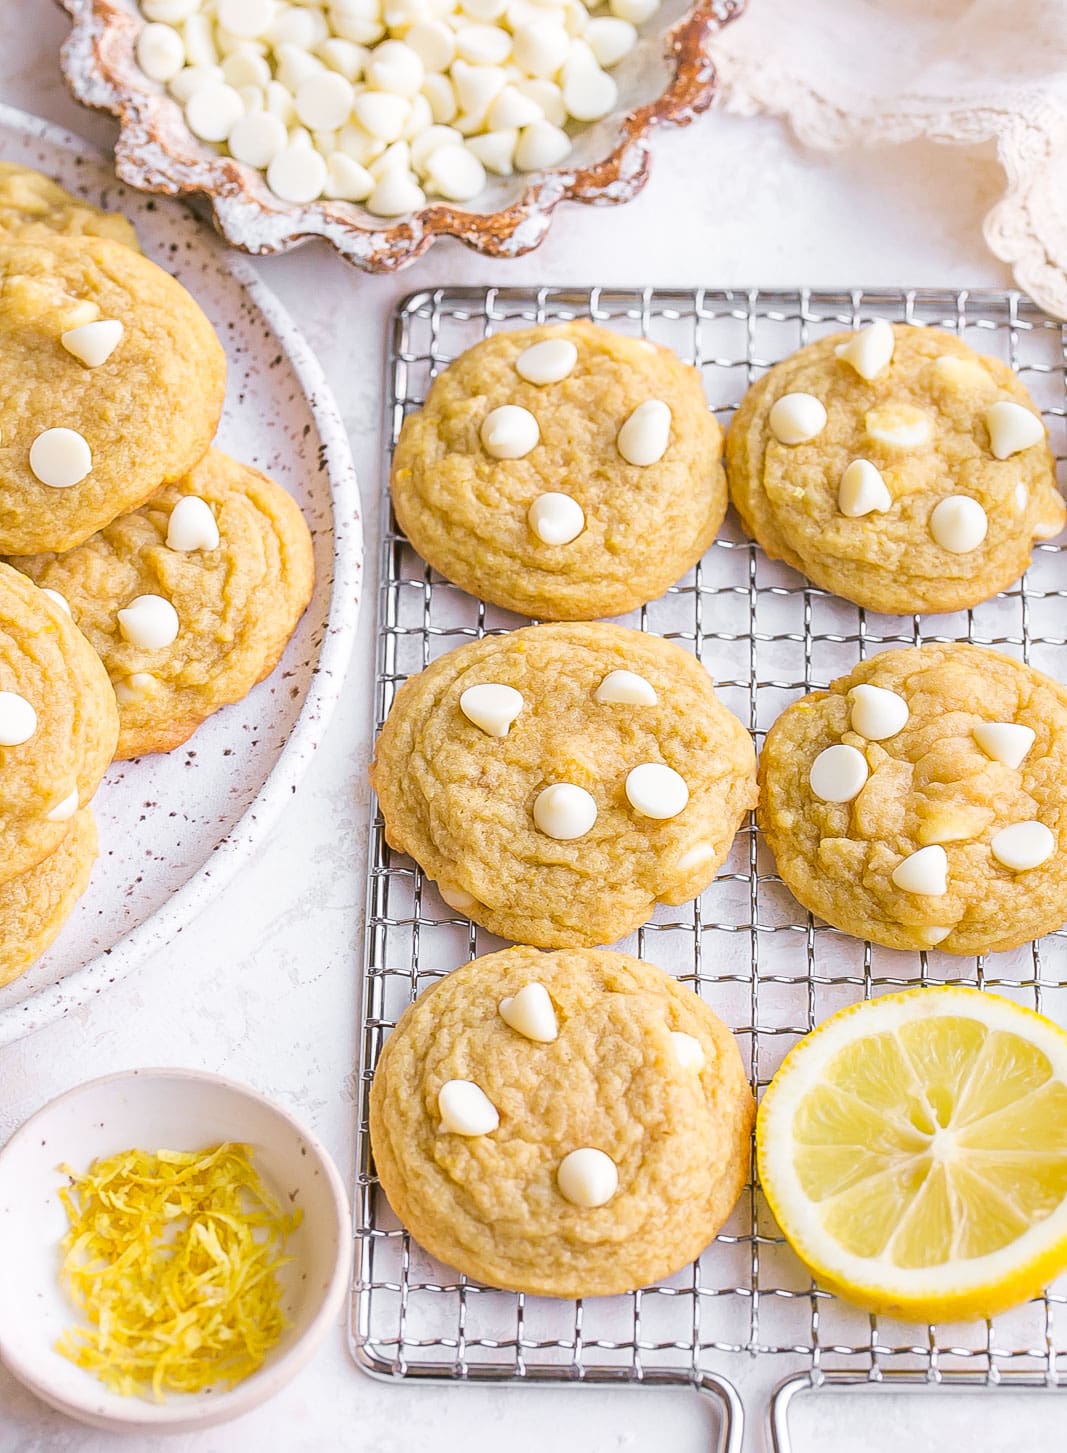 Cookies with white chocolate on cooling rack.